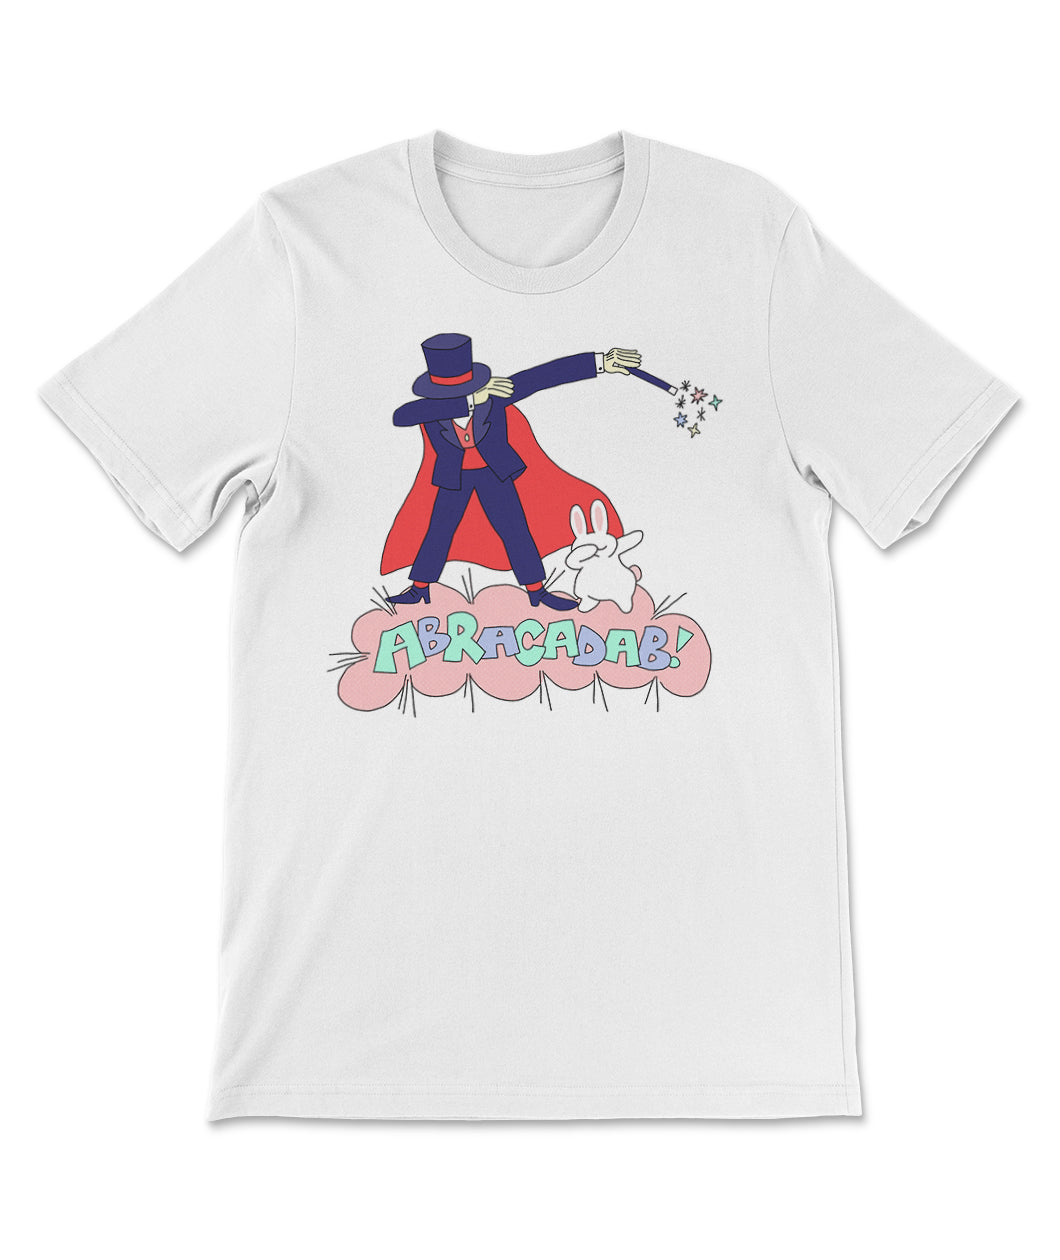 A white t-shirt with an illustration of a magician wearing a purple suit with a red cape, holding a wand and dabbing with their arms. There is also a small with rabbit dabbing next to the feet of the magician. Below the figures is the text 